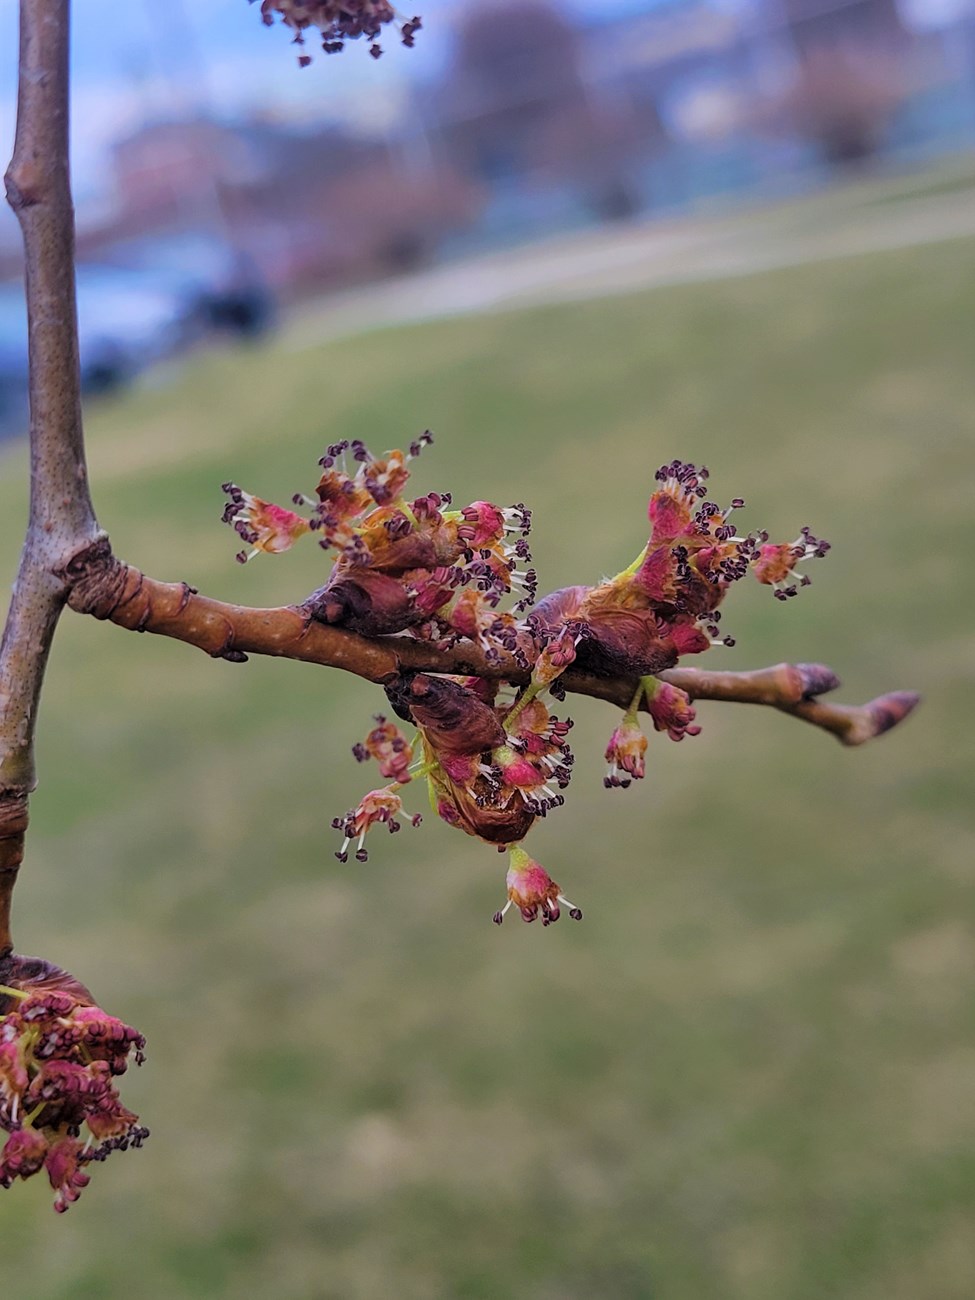 reddish flower buds in clumps on a branch